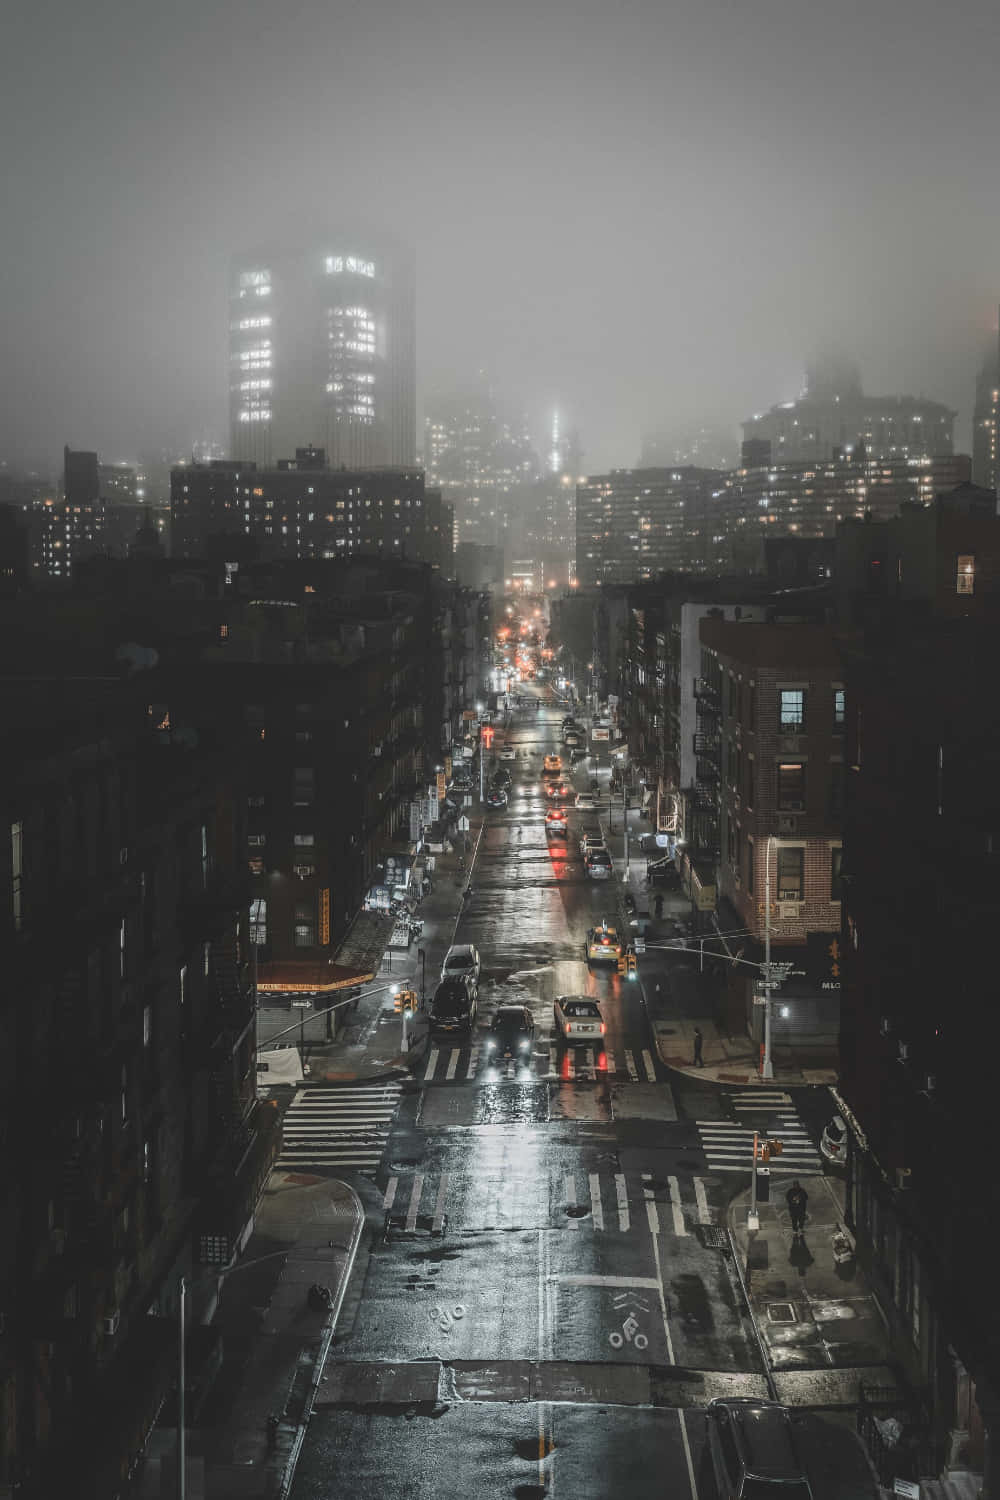 Foggy Aesthetic City At Night Background